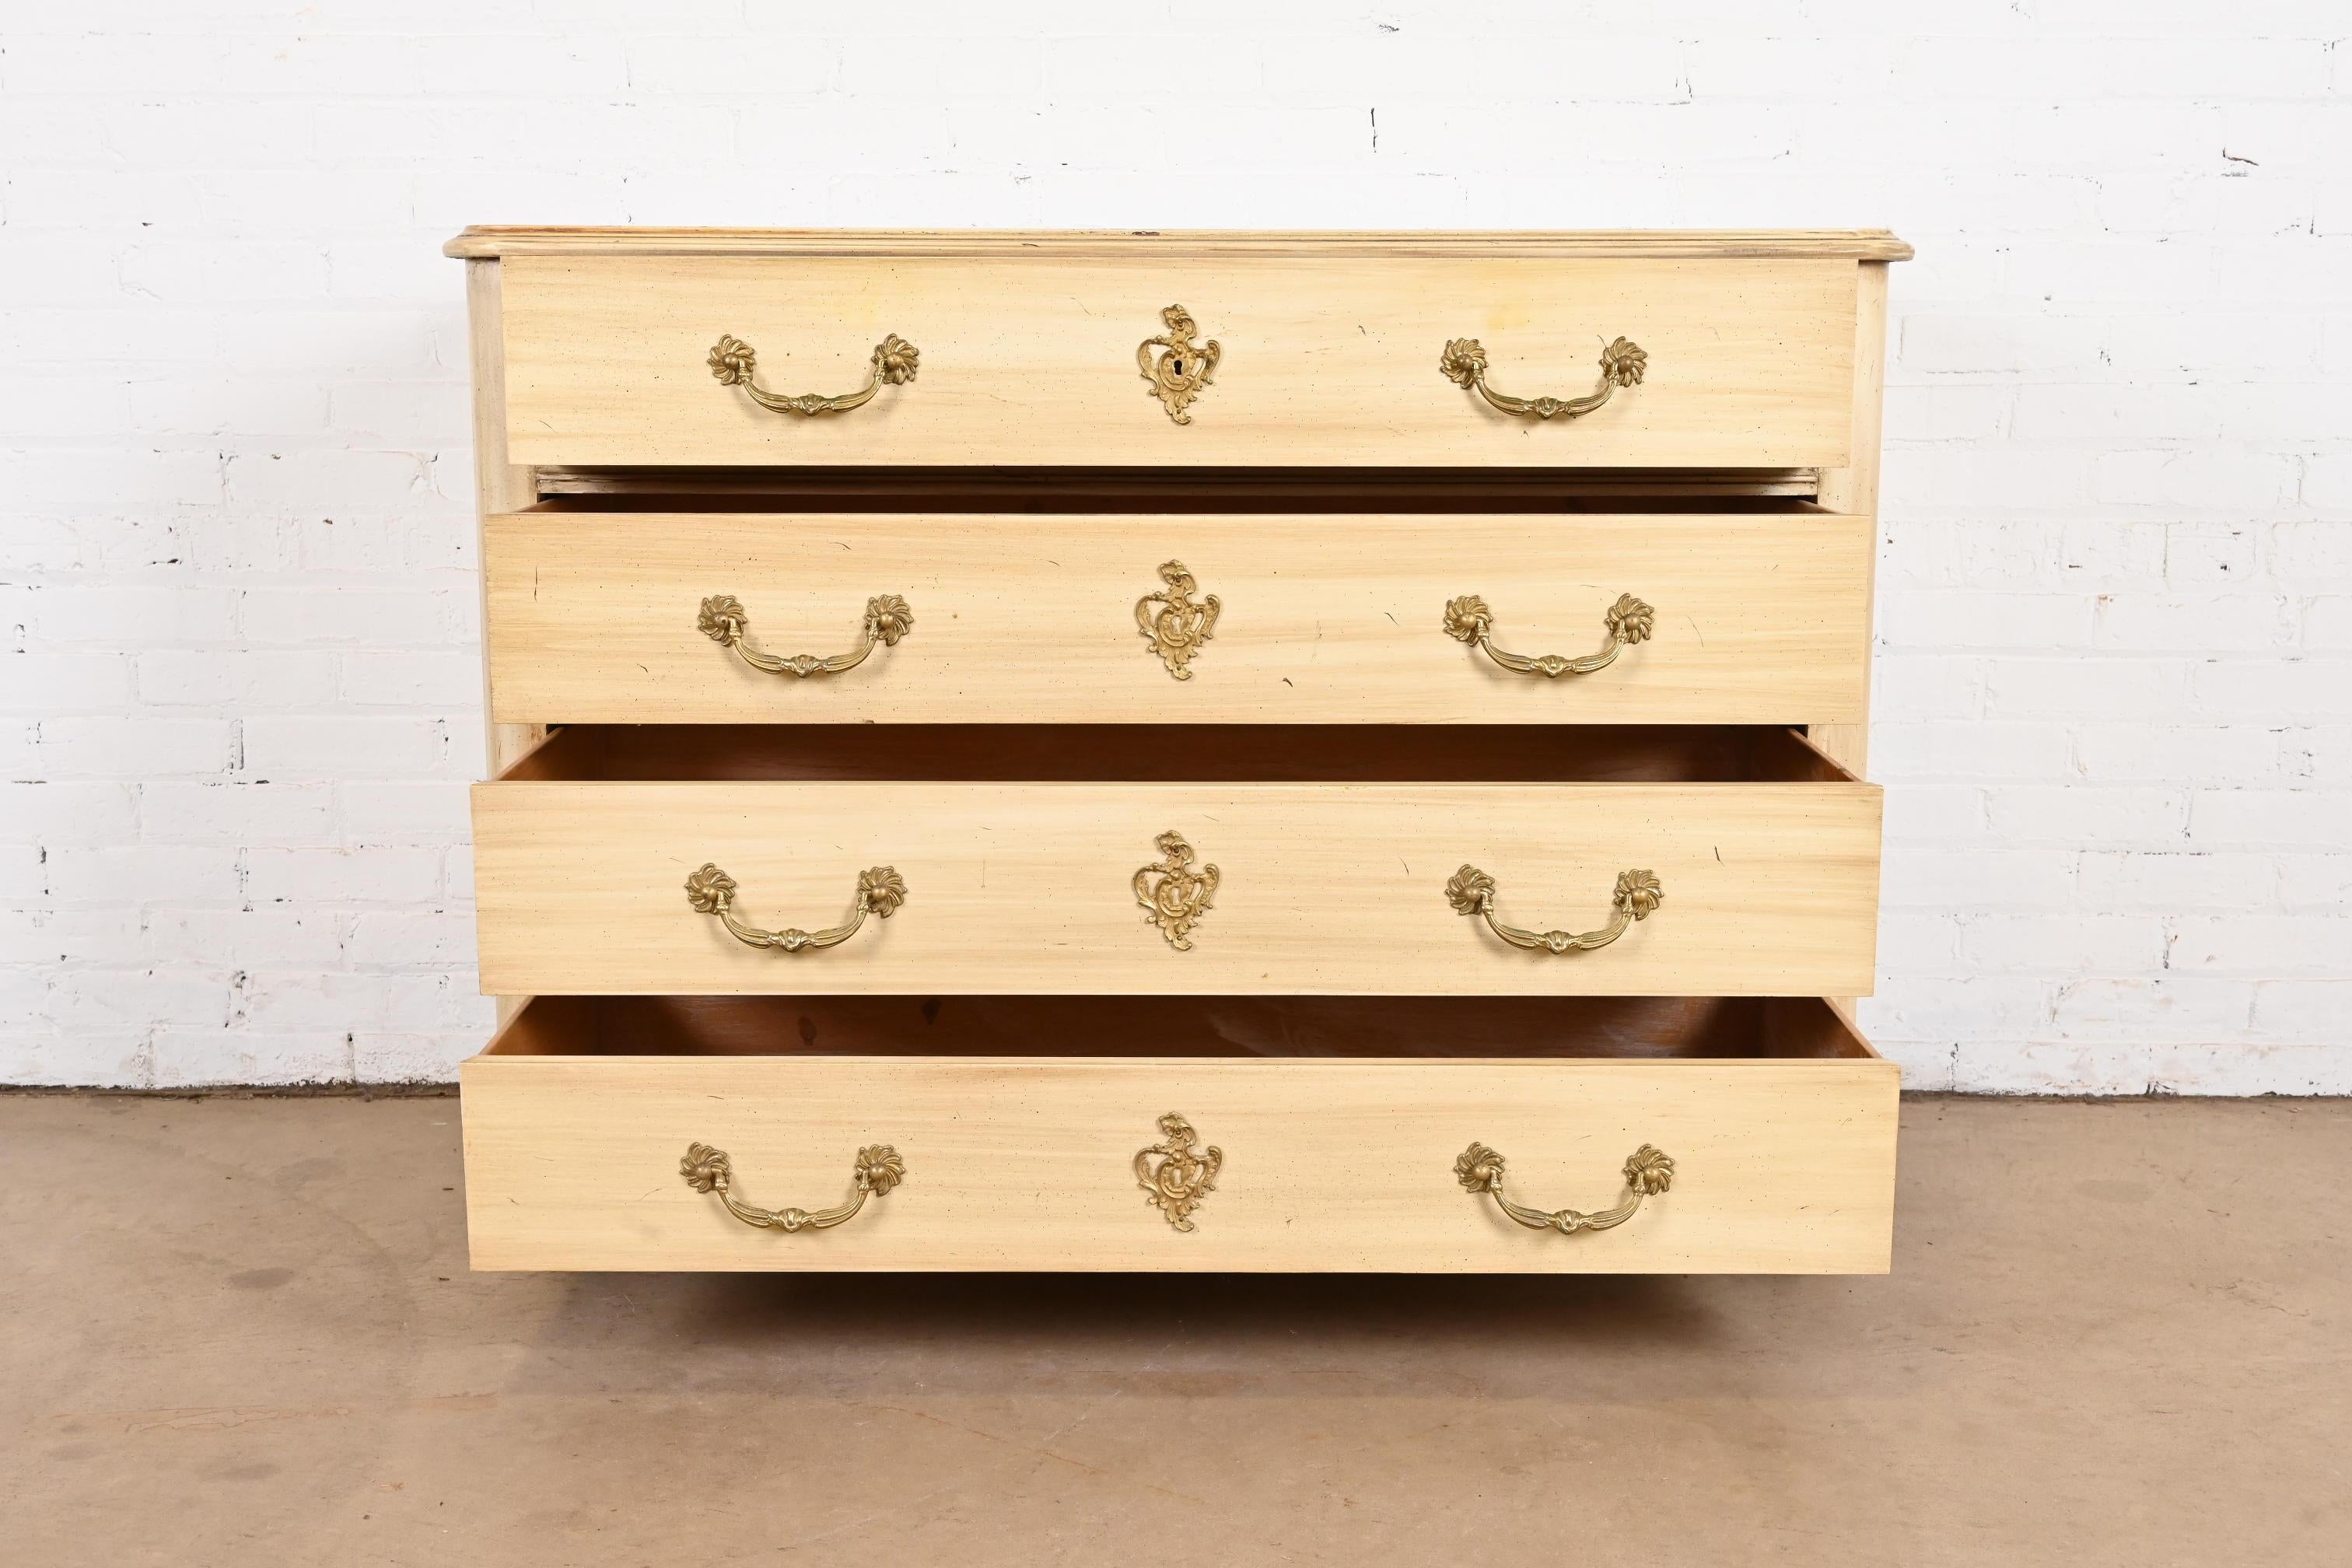 Baker Furniture French Provincial Cream Painted Chest of Drawers, Circa 1960s For Sale 1